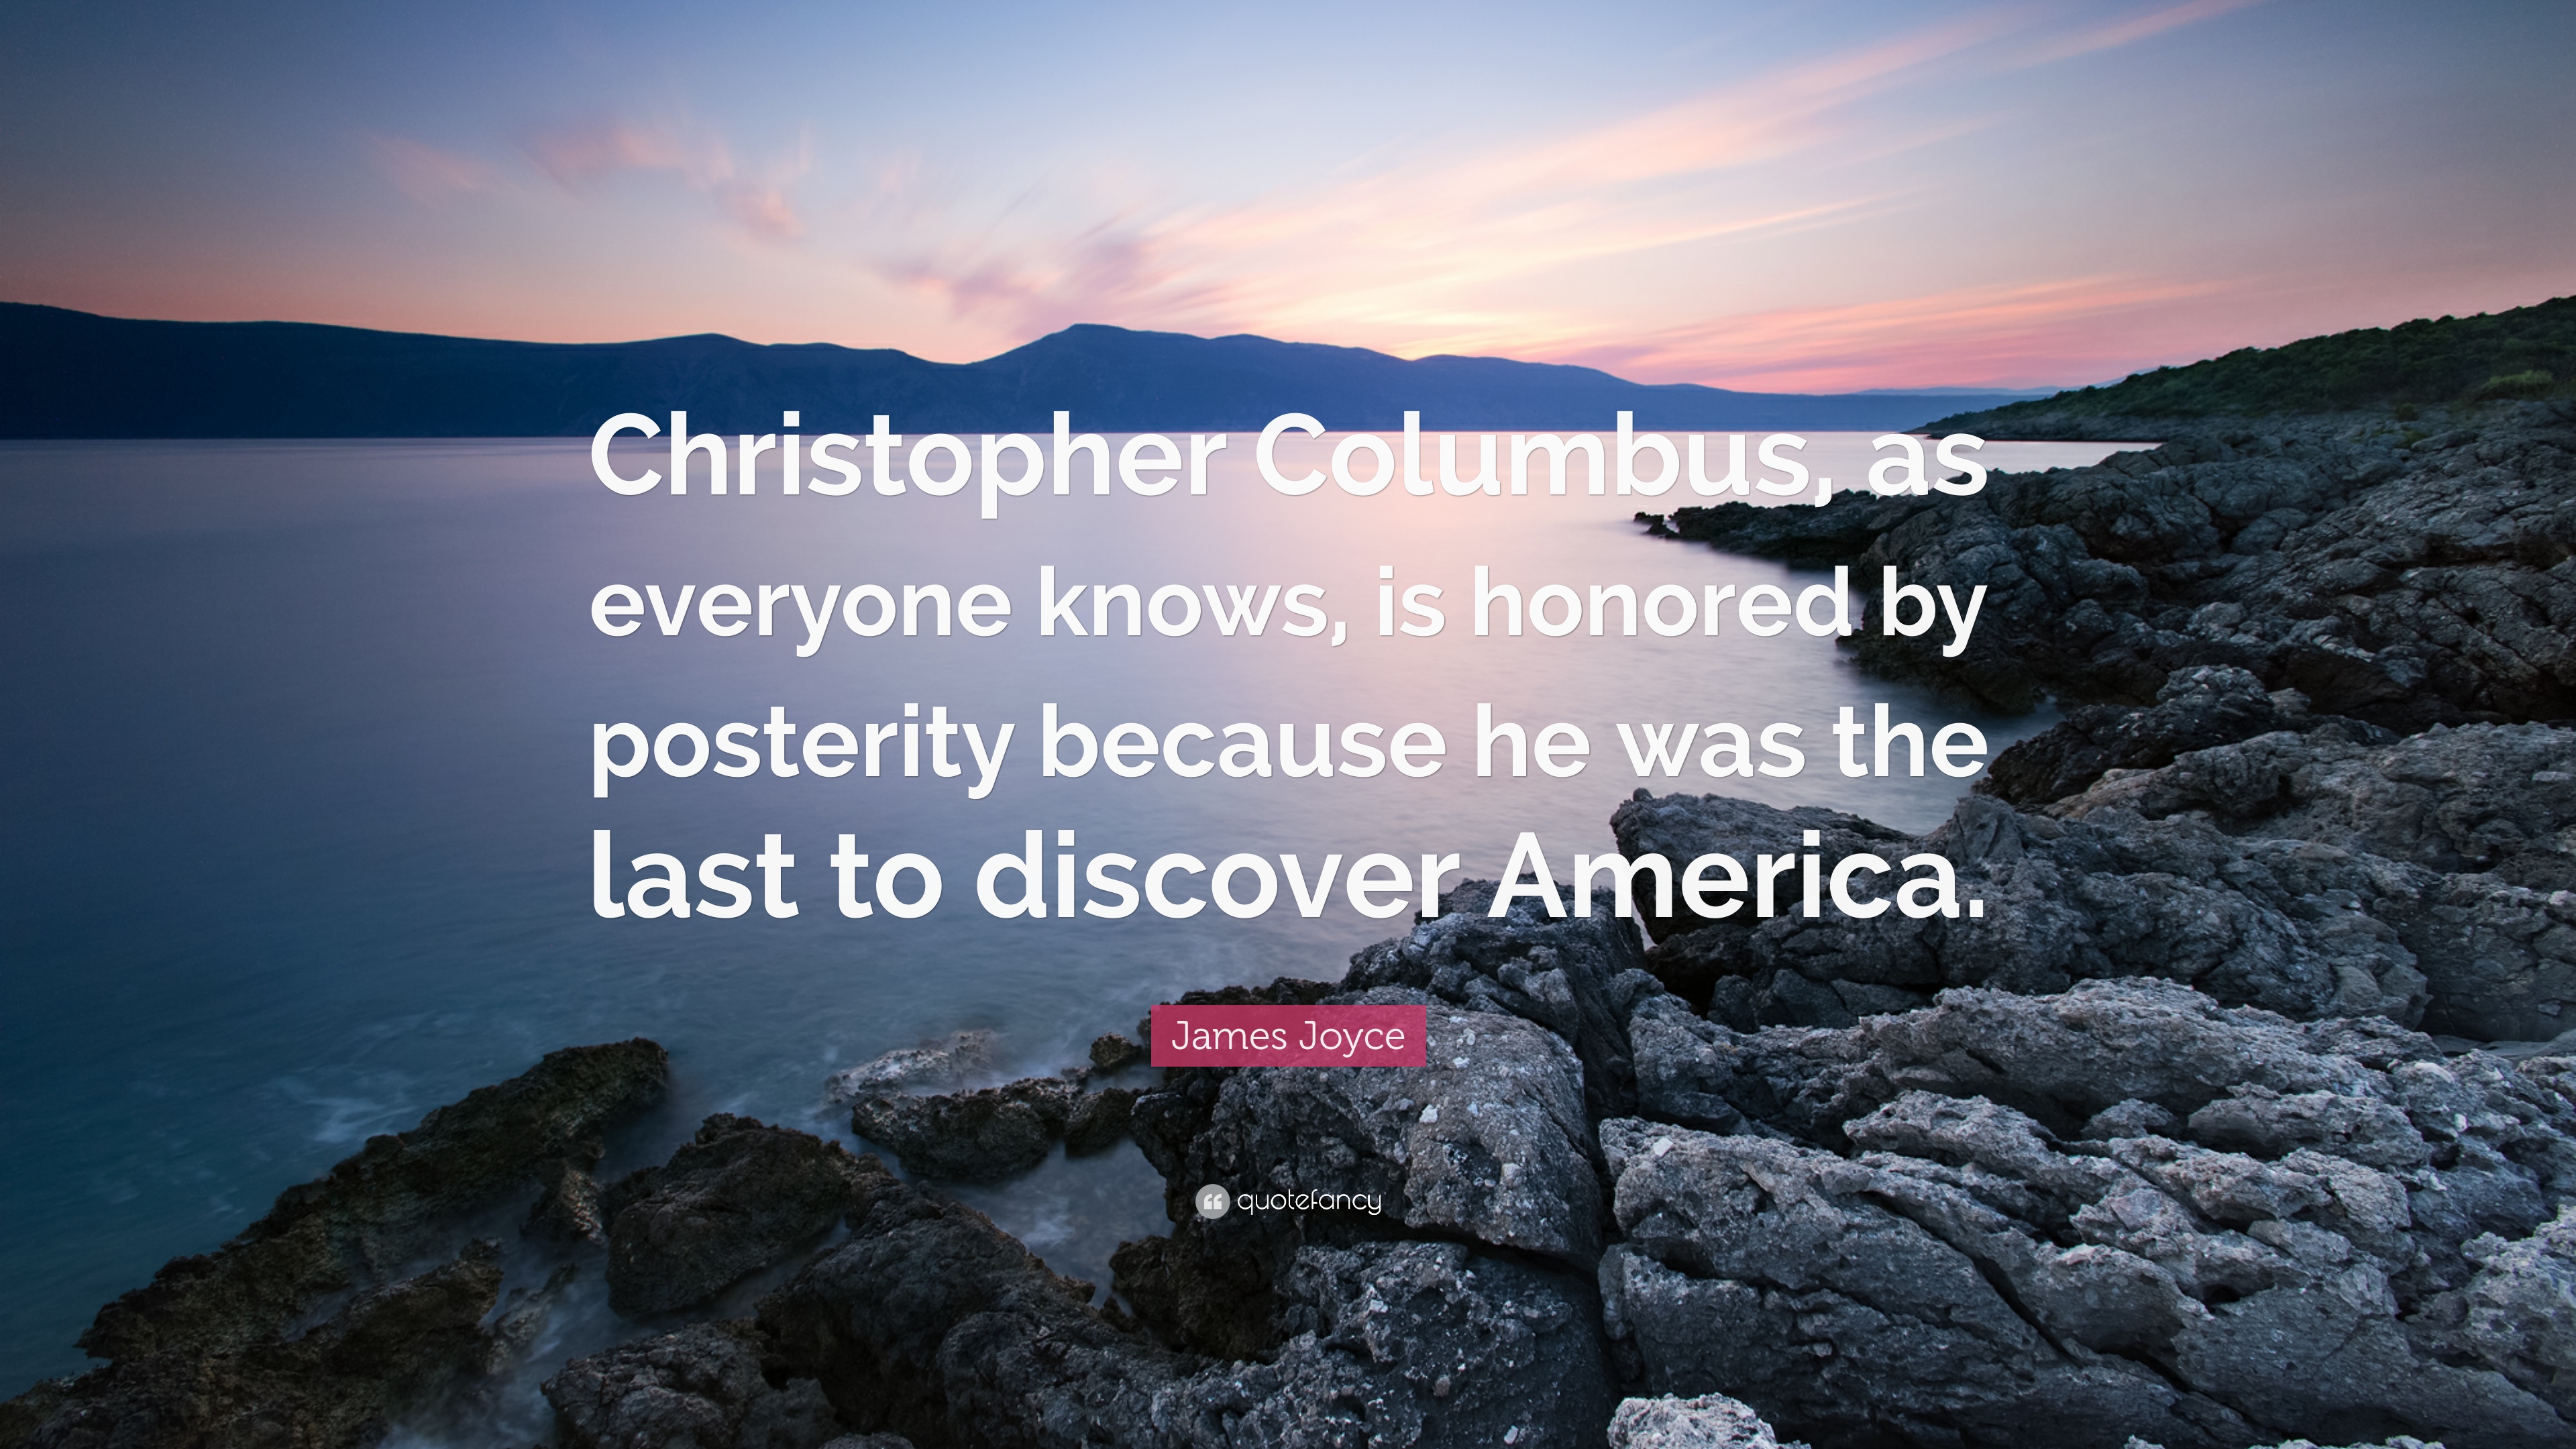 James Joyce Quote: “Christopher Columbus, as everyone knows, is